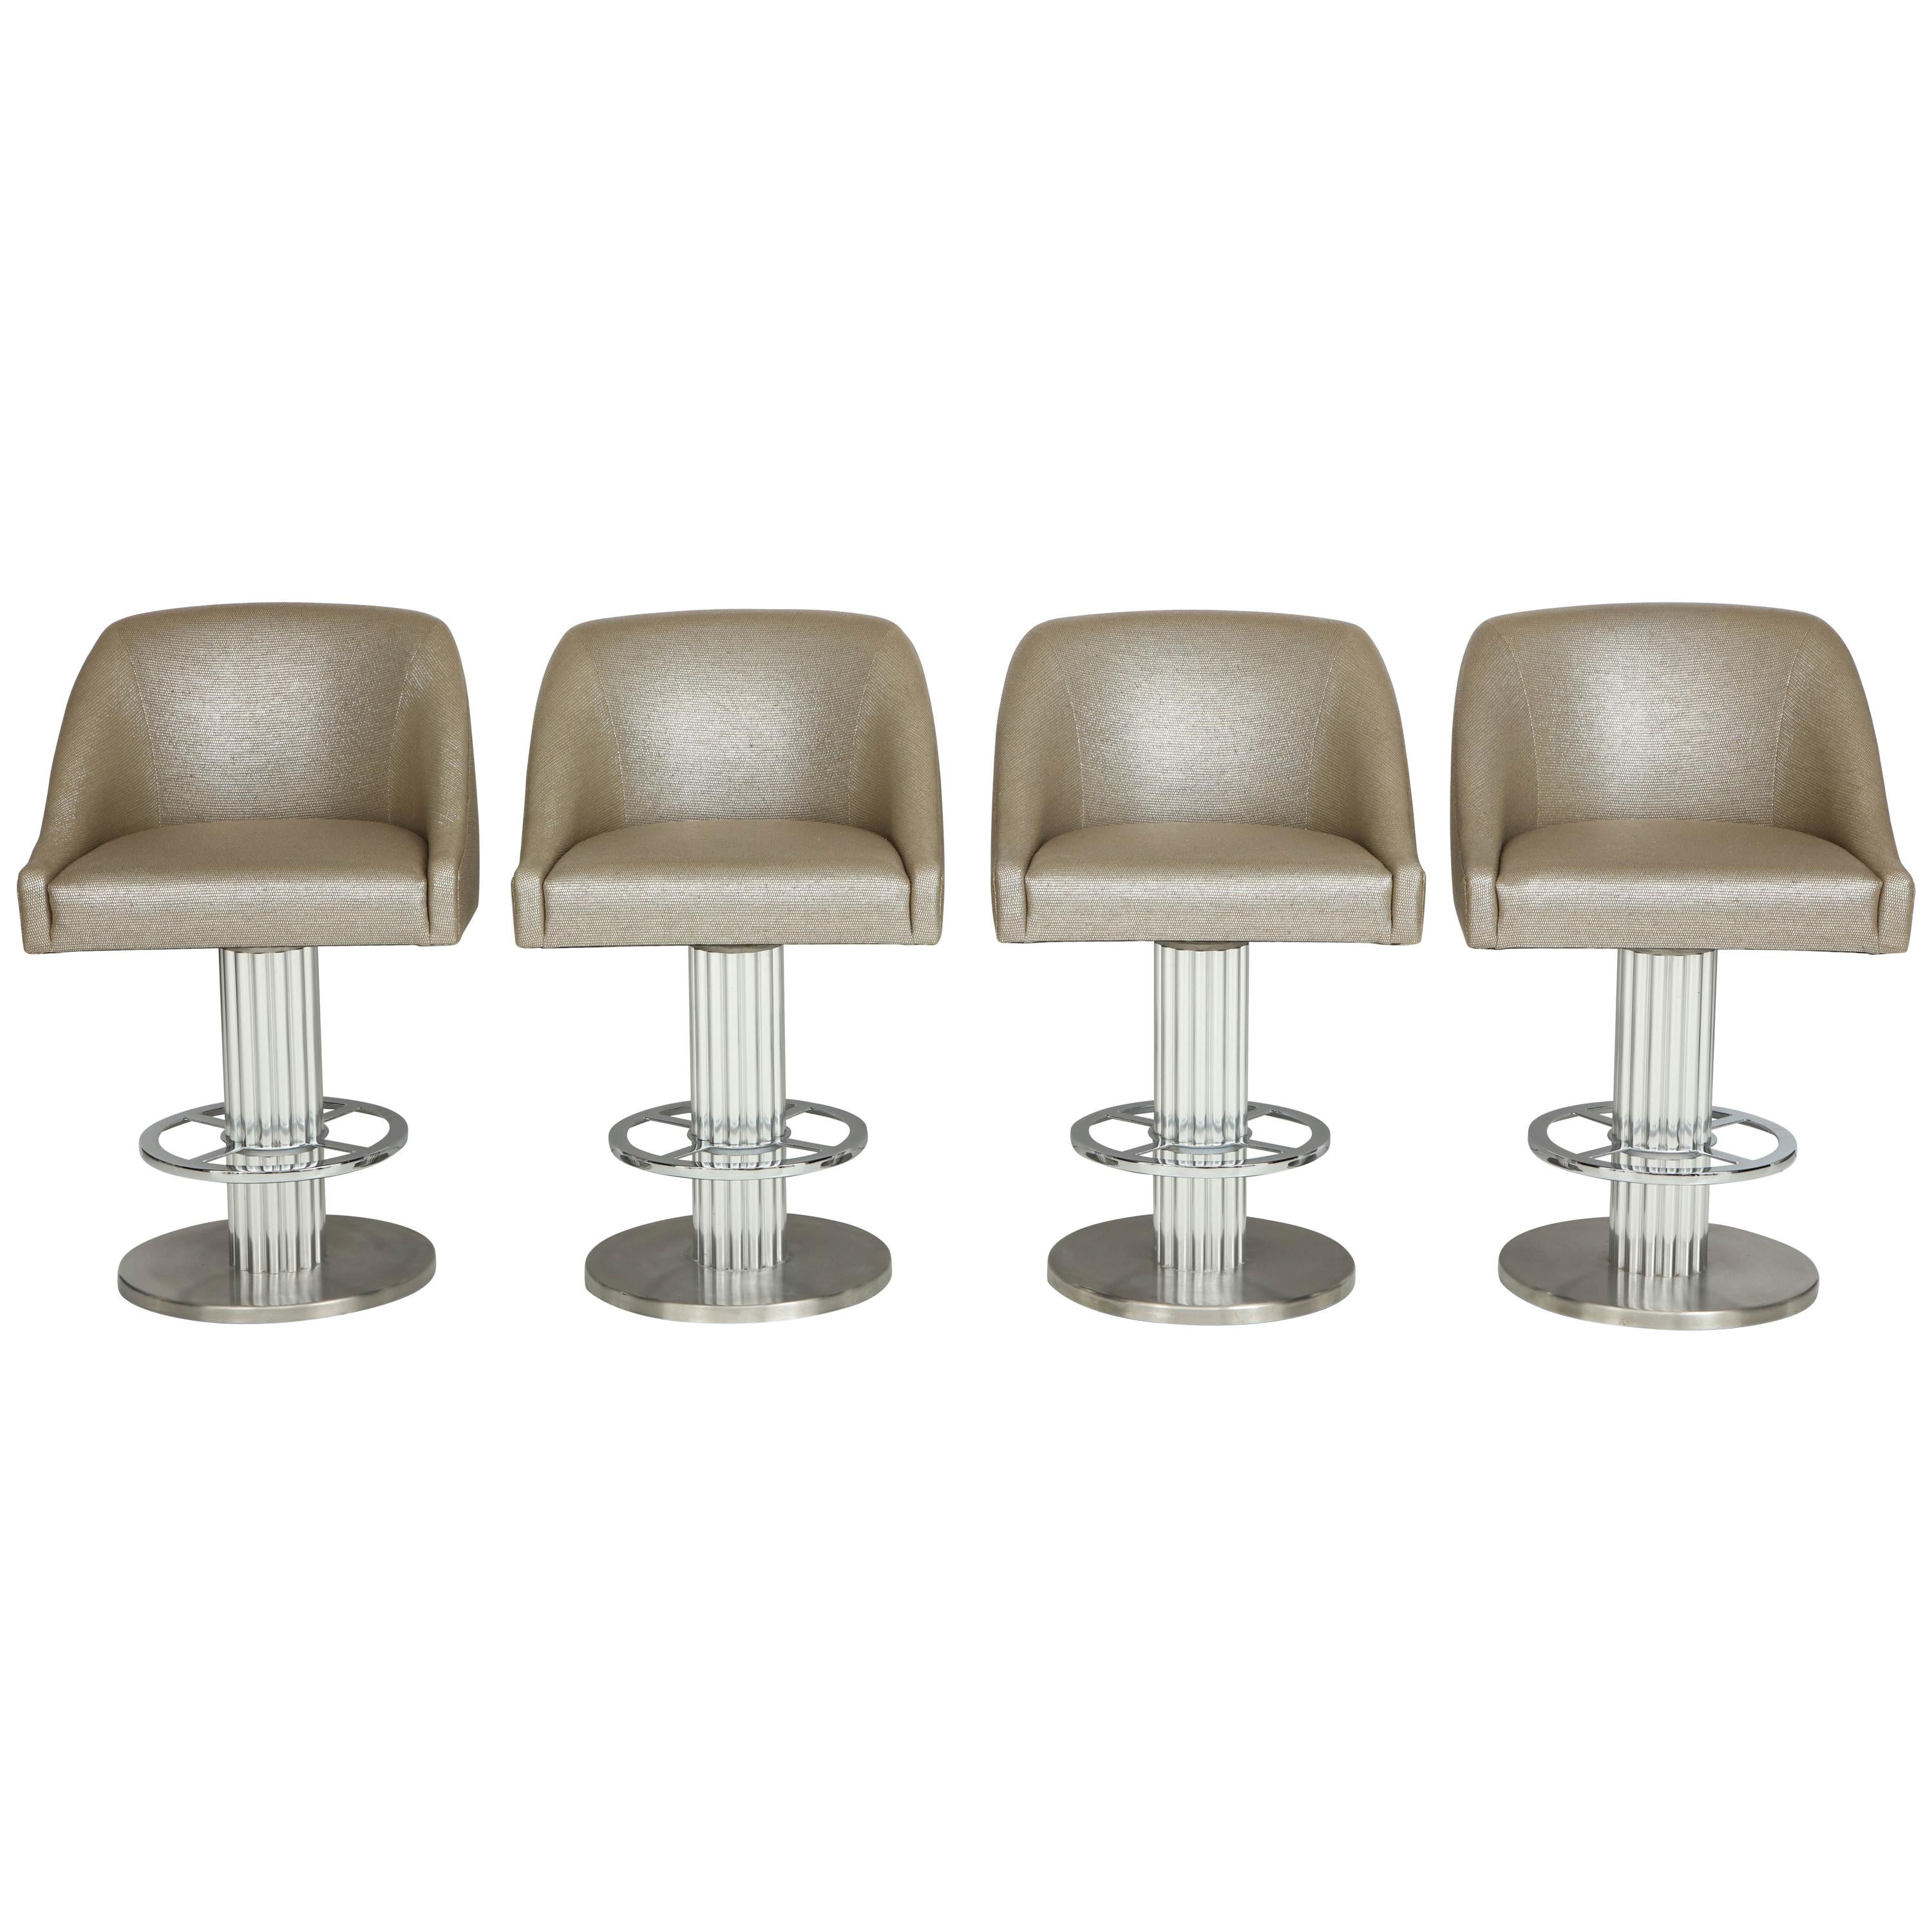 Set Of Four Designs for Leisure Bar Stools